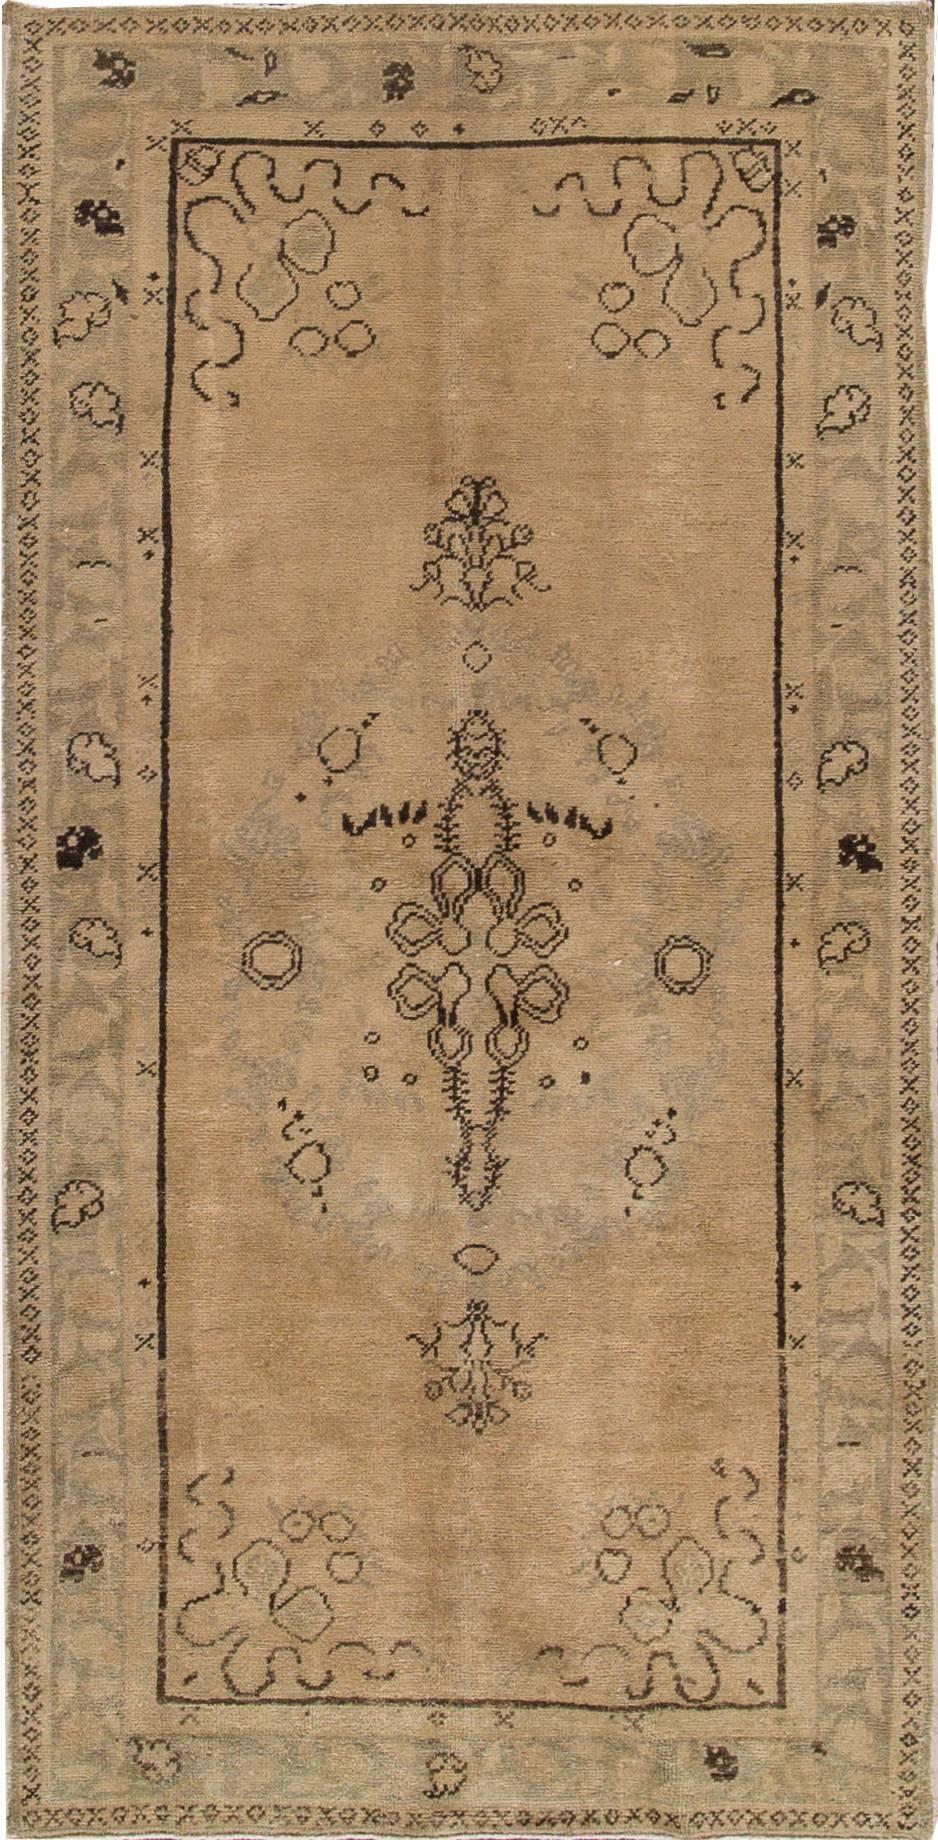 20th century Turkish Khotan carpet with a beige/tan field and medallion design. Measures approximately 3 feet 3 inches by 6 feet 5 inches.